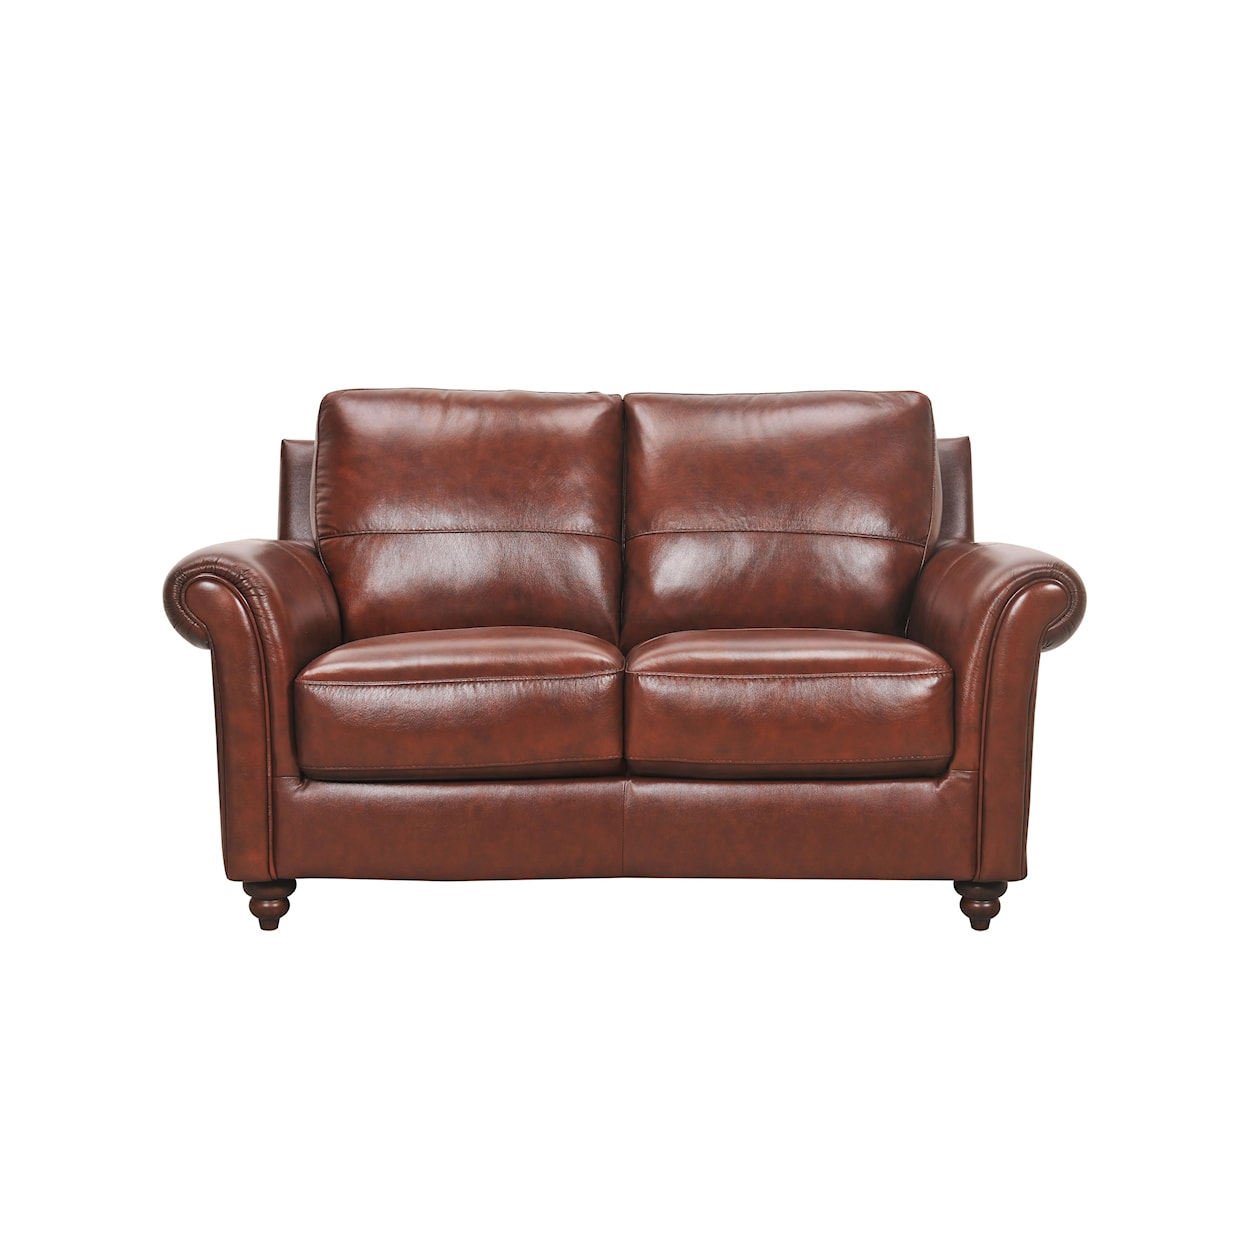 Violino Grady Leather Loveseat with Rolled Arms and Turned